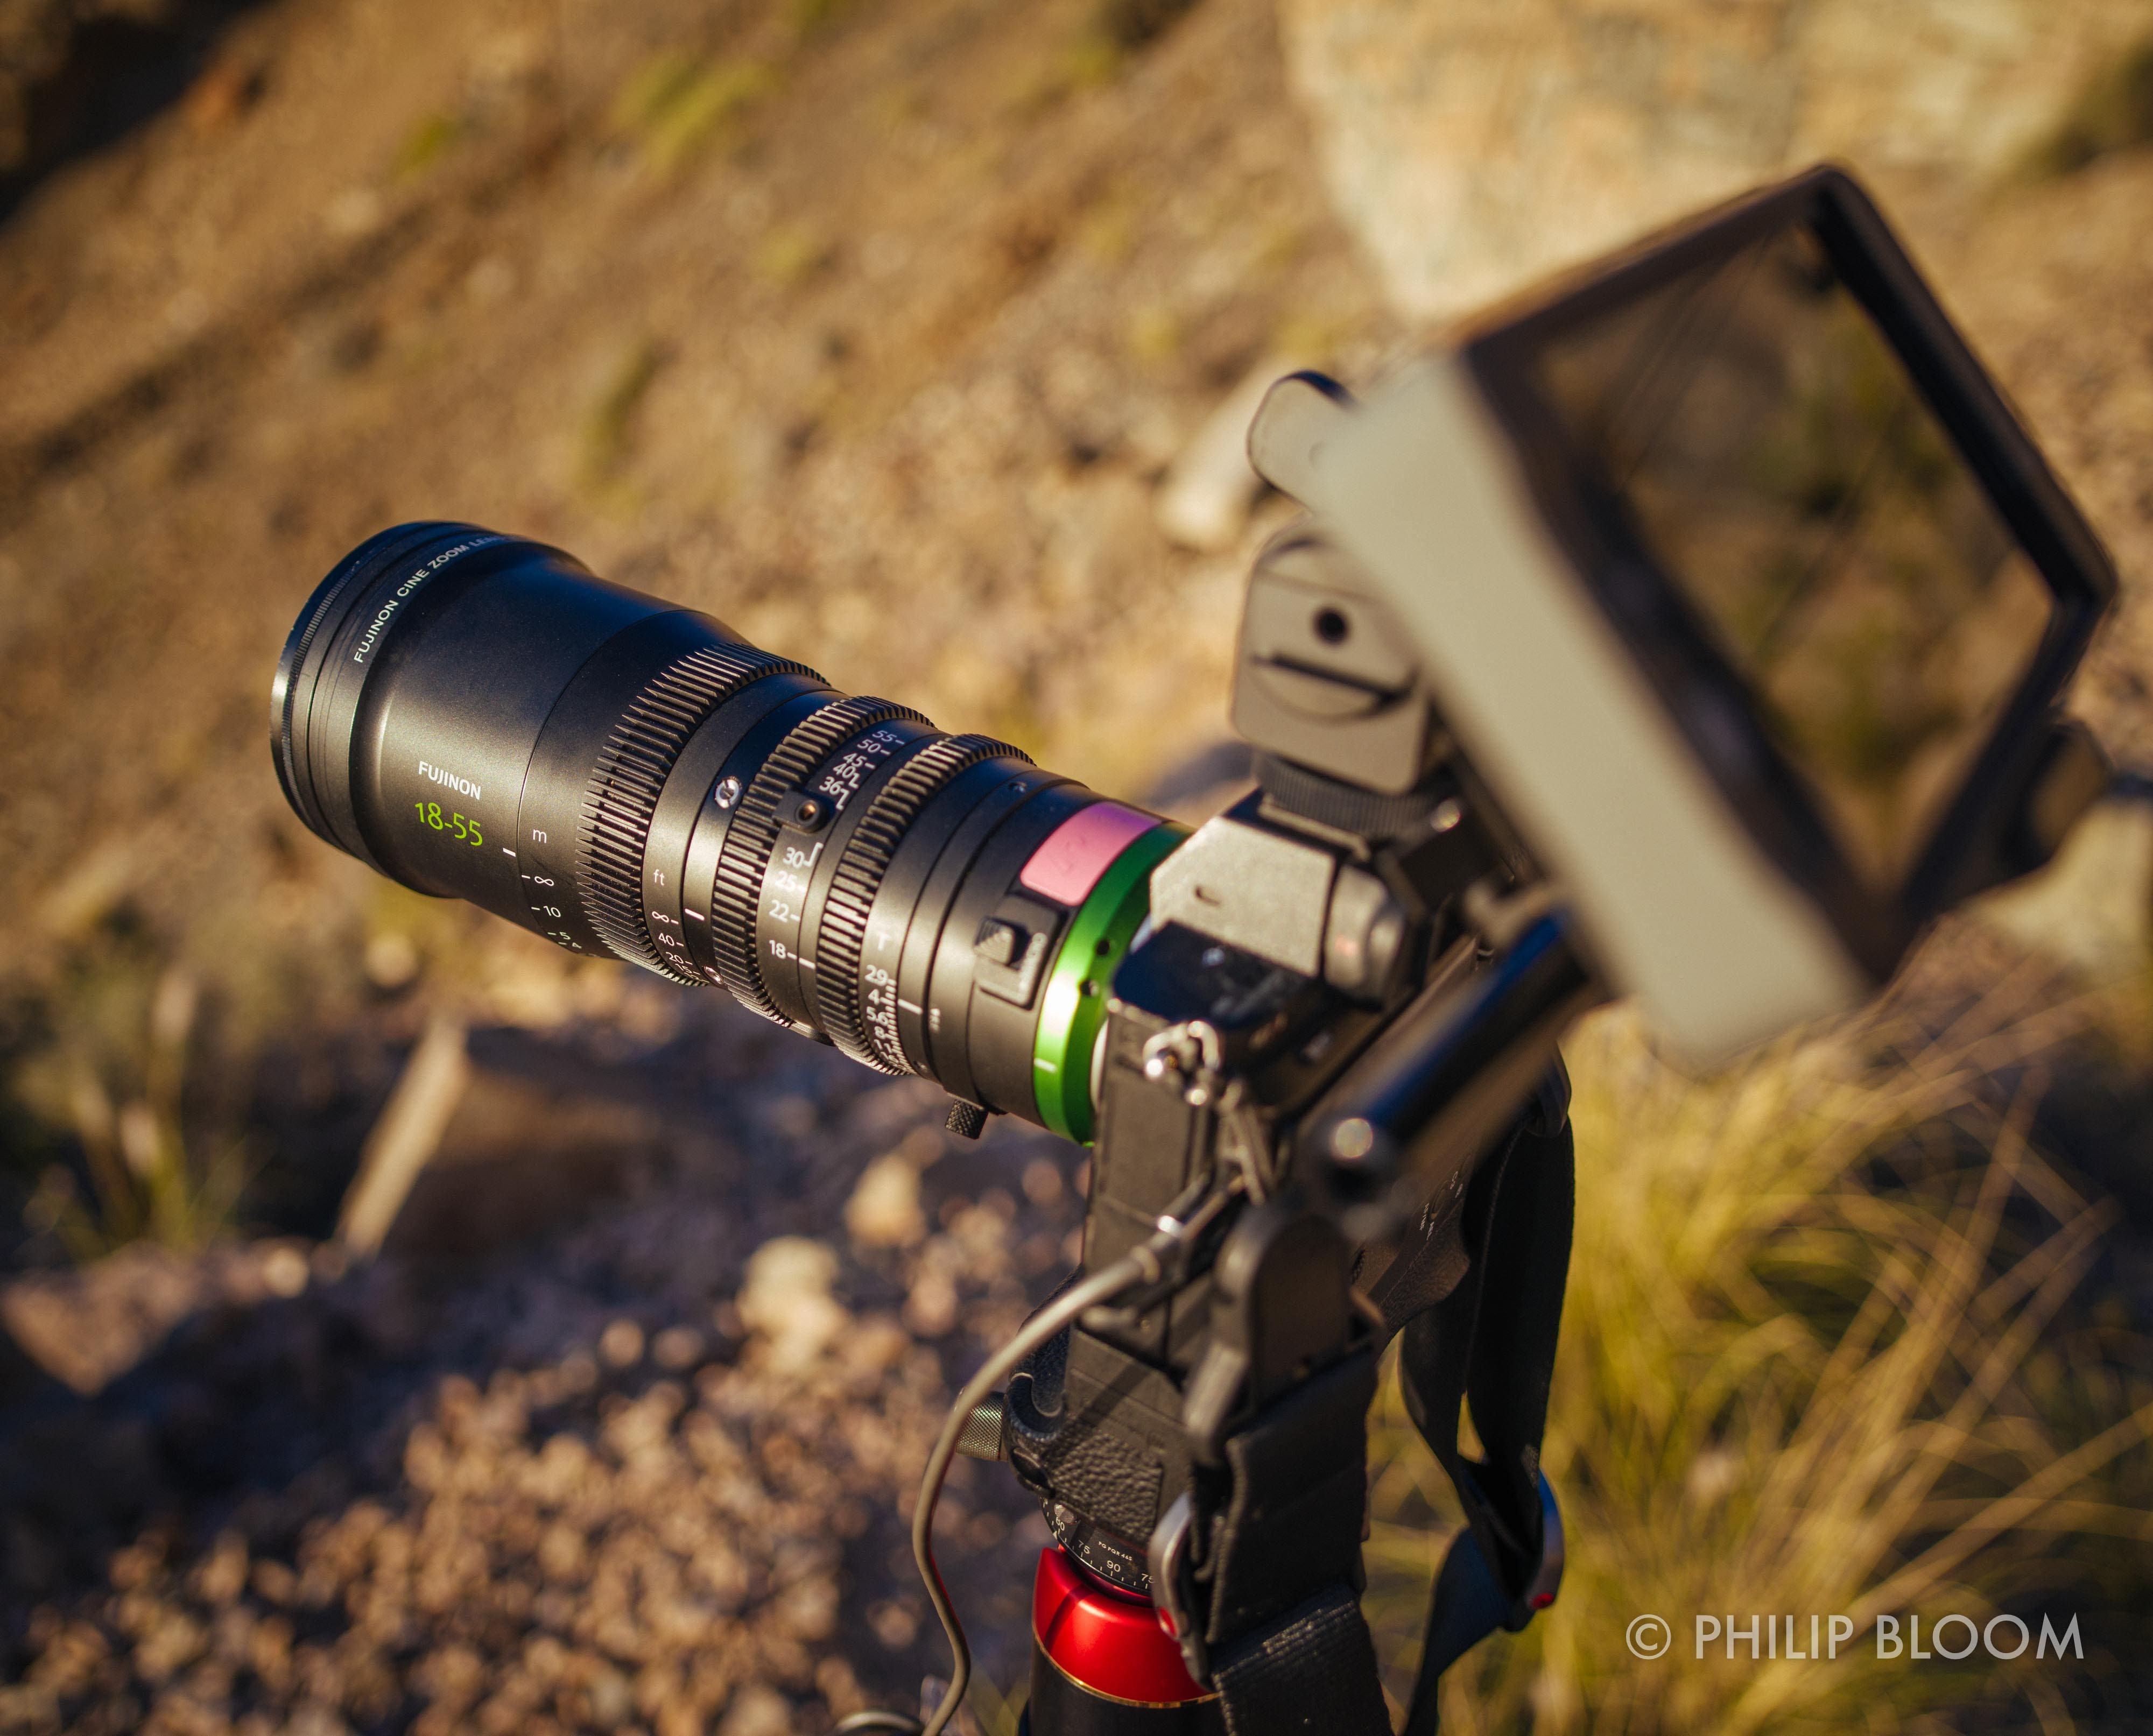 Fujinon Mk 18 55mm T2 9 E Mount Cine Lens First Footage And Thoughts Here Philip Bloom Blog